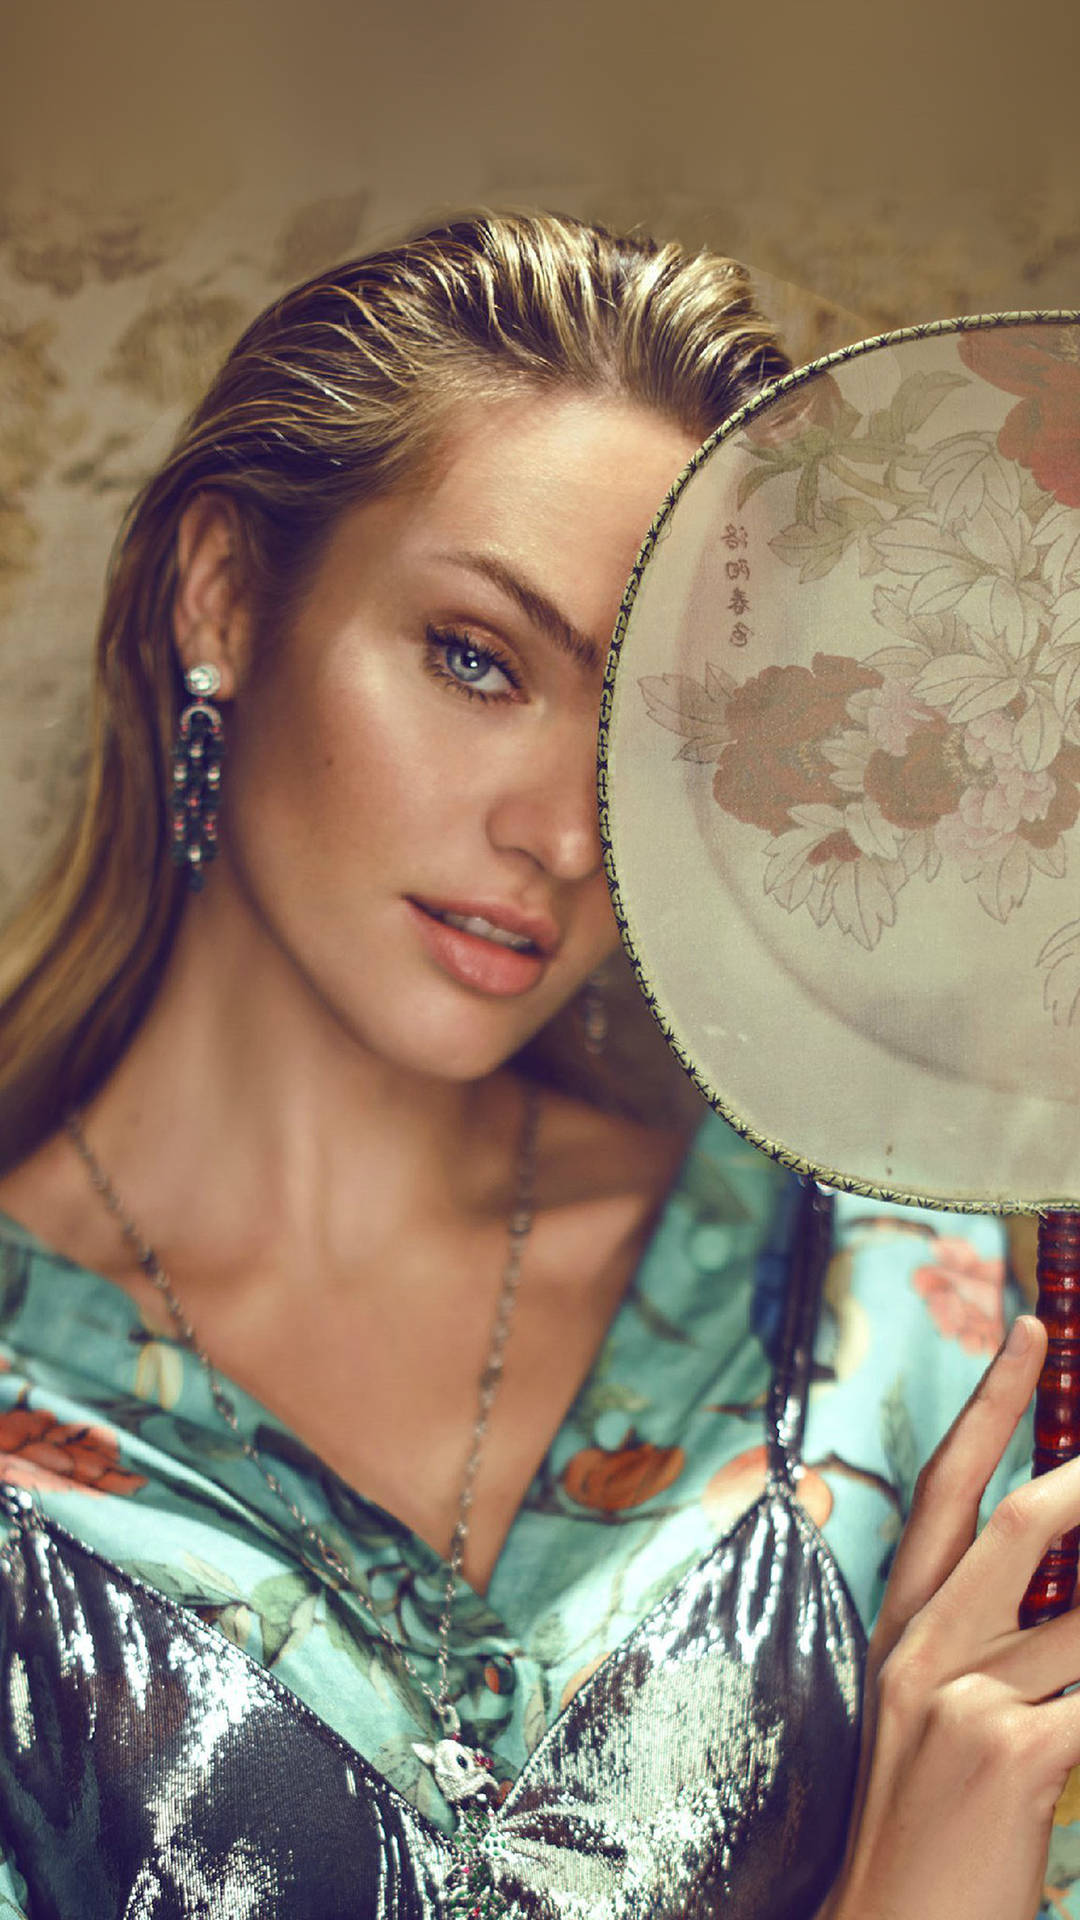 Candiceswanepoel Vintage Fashion Photography - Candice Swanepoel Vintage Modefotografi Wallpaper